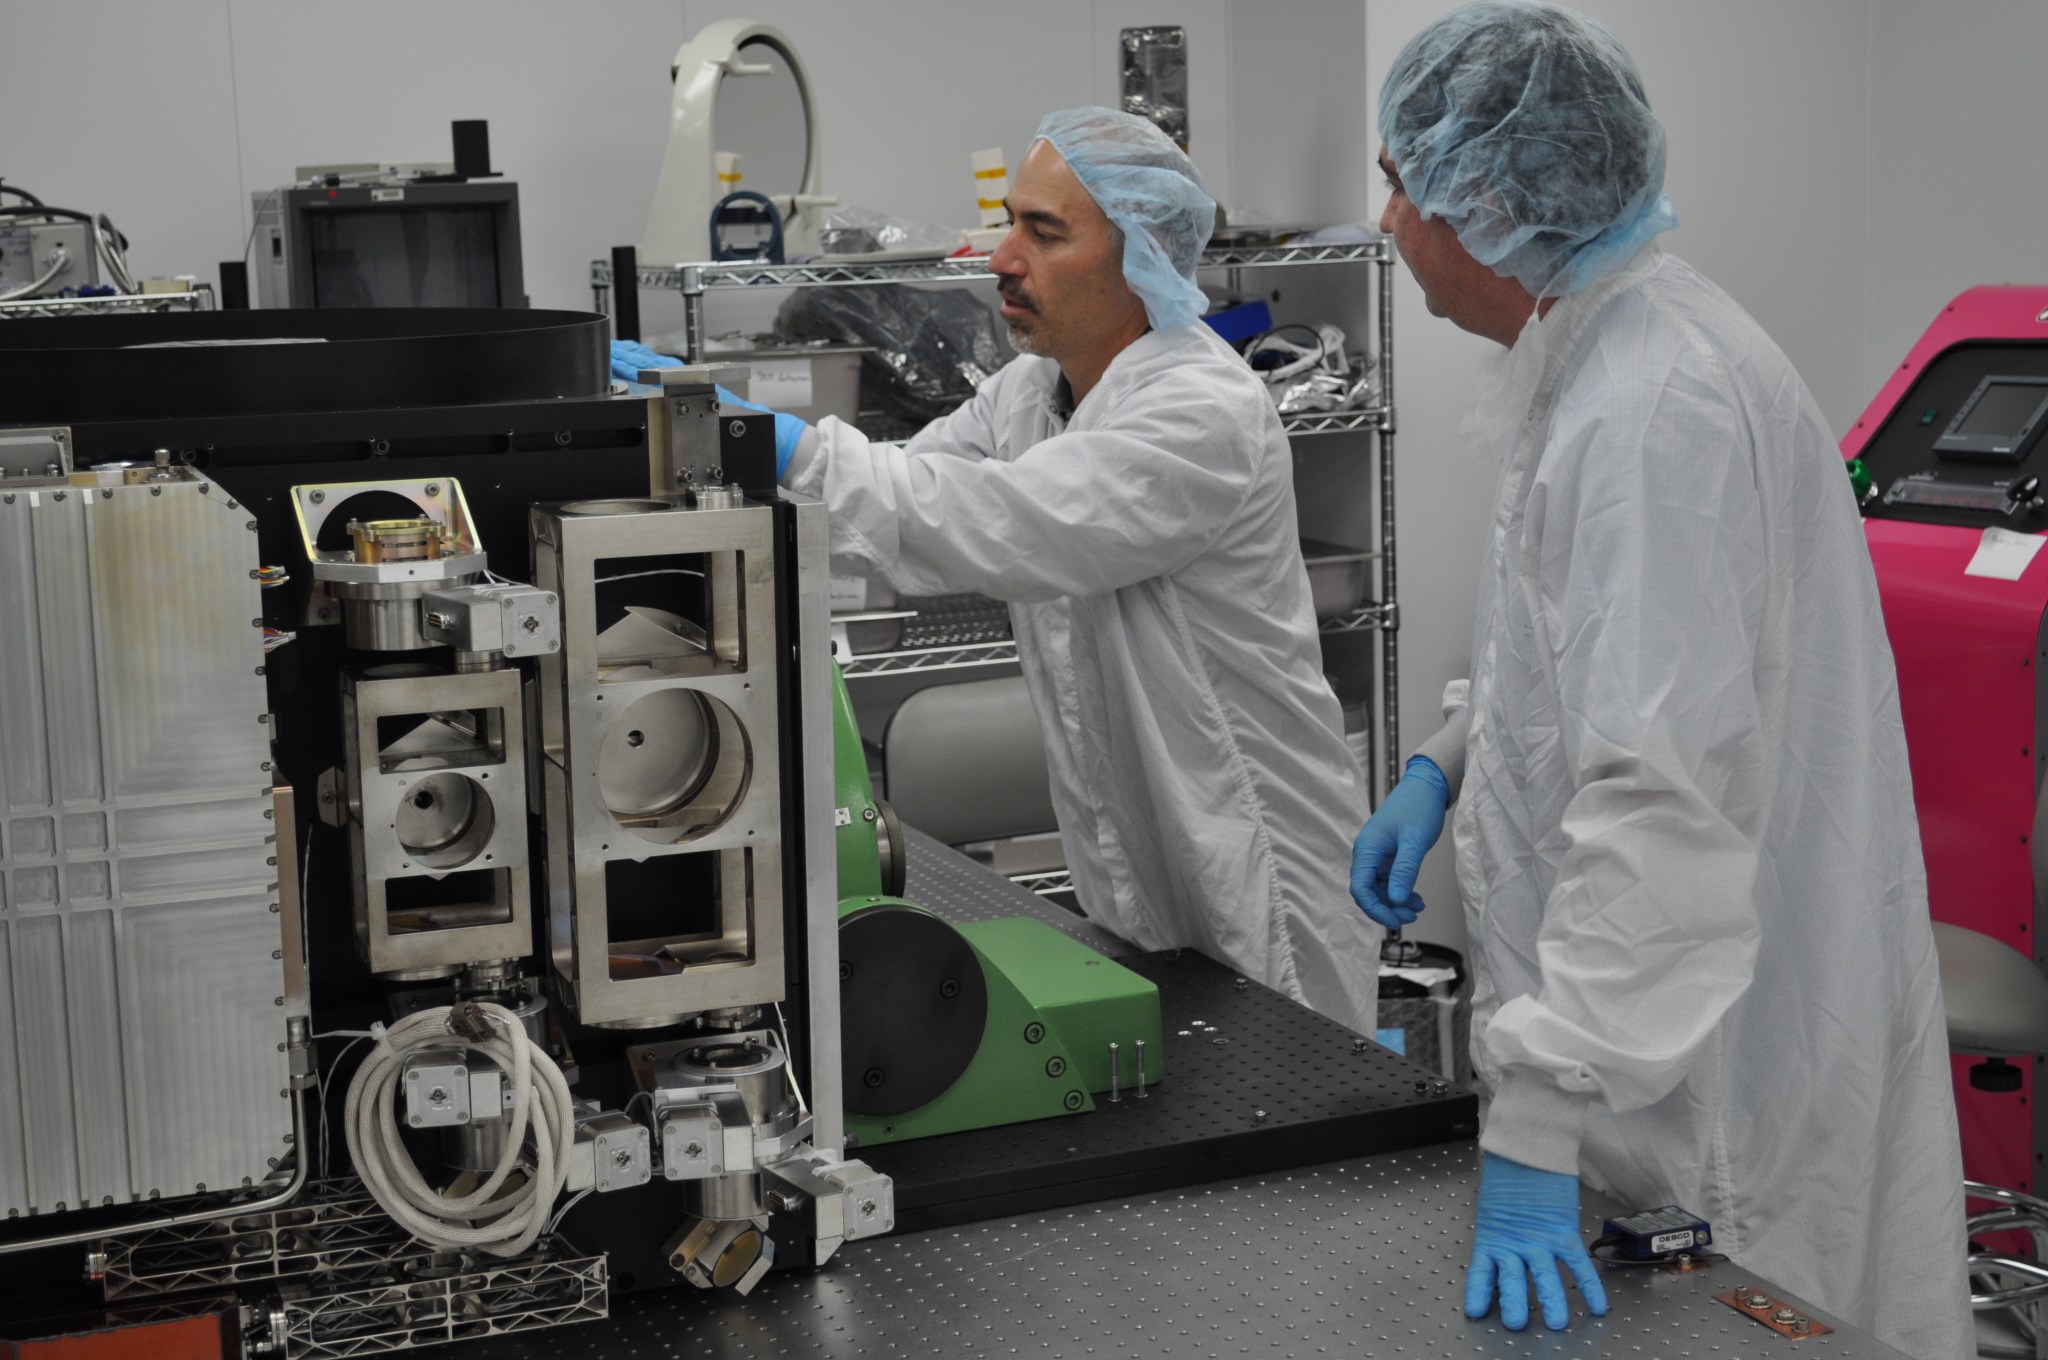 technicians in bunny suits test fitting components